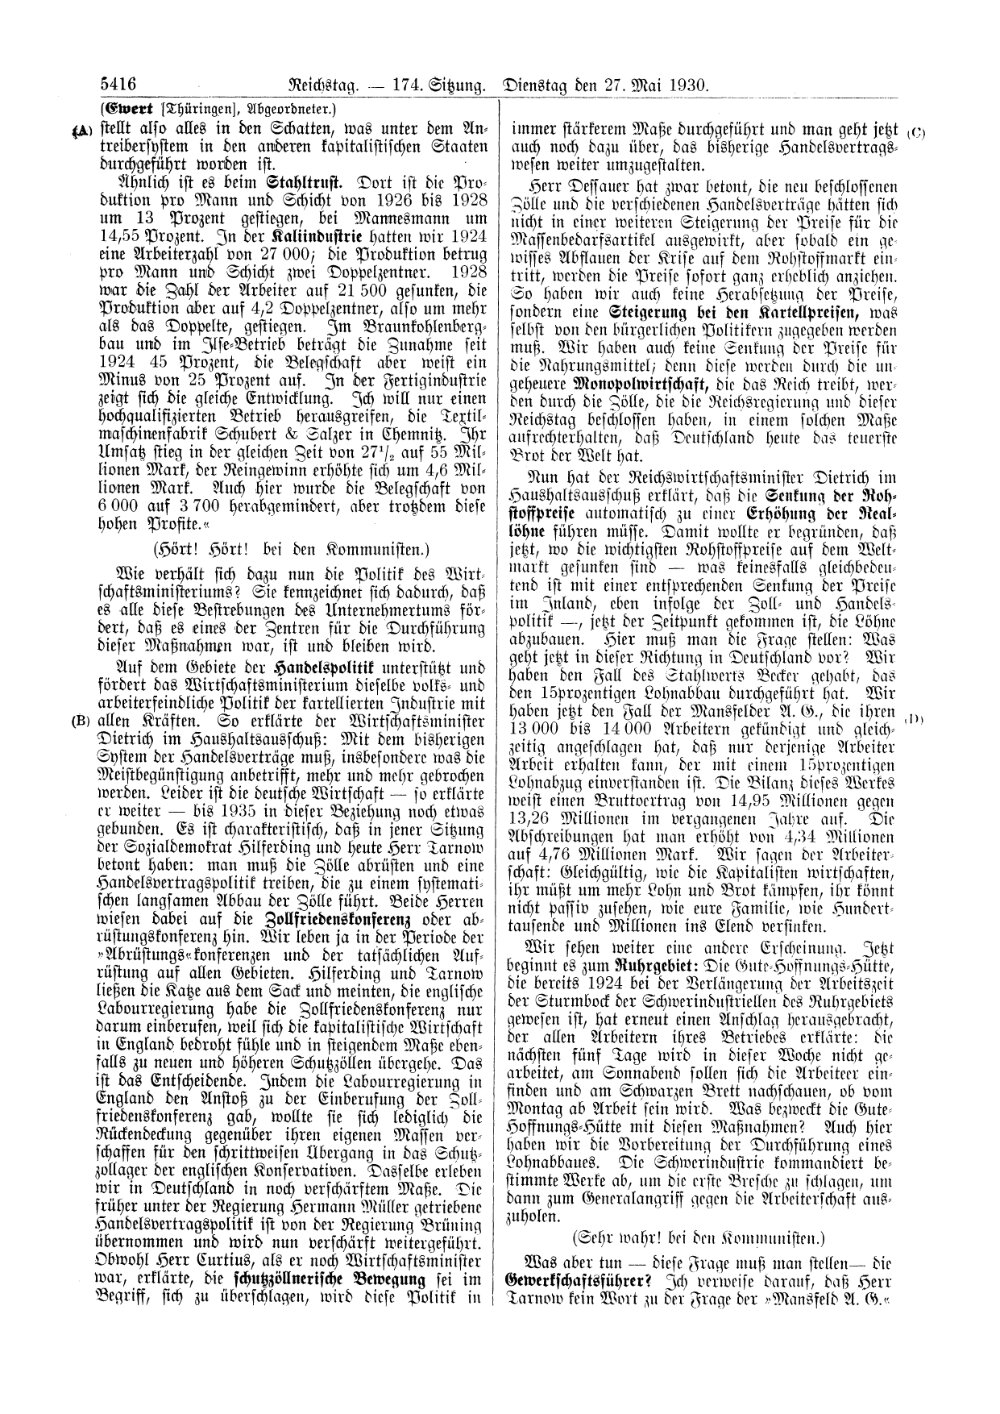 Scan of page 5416